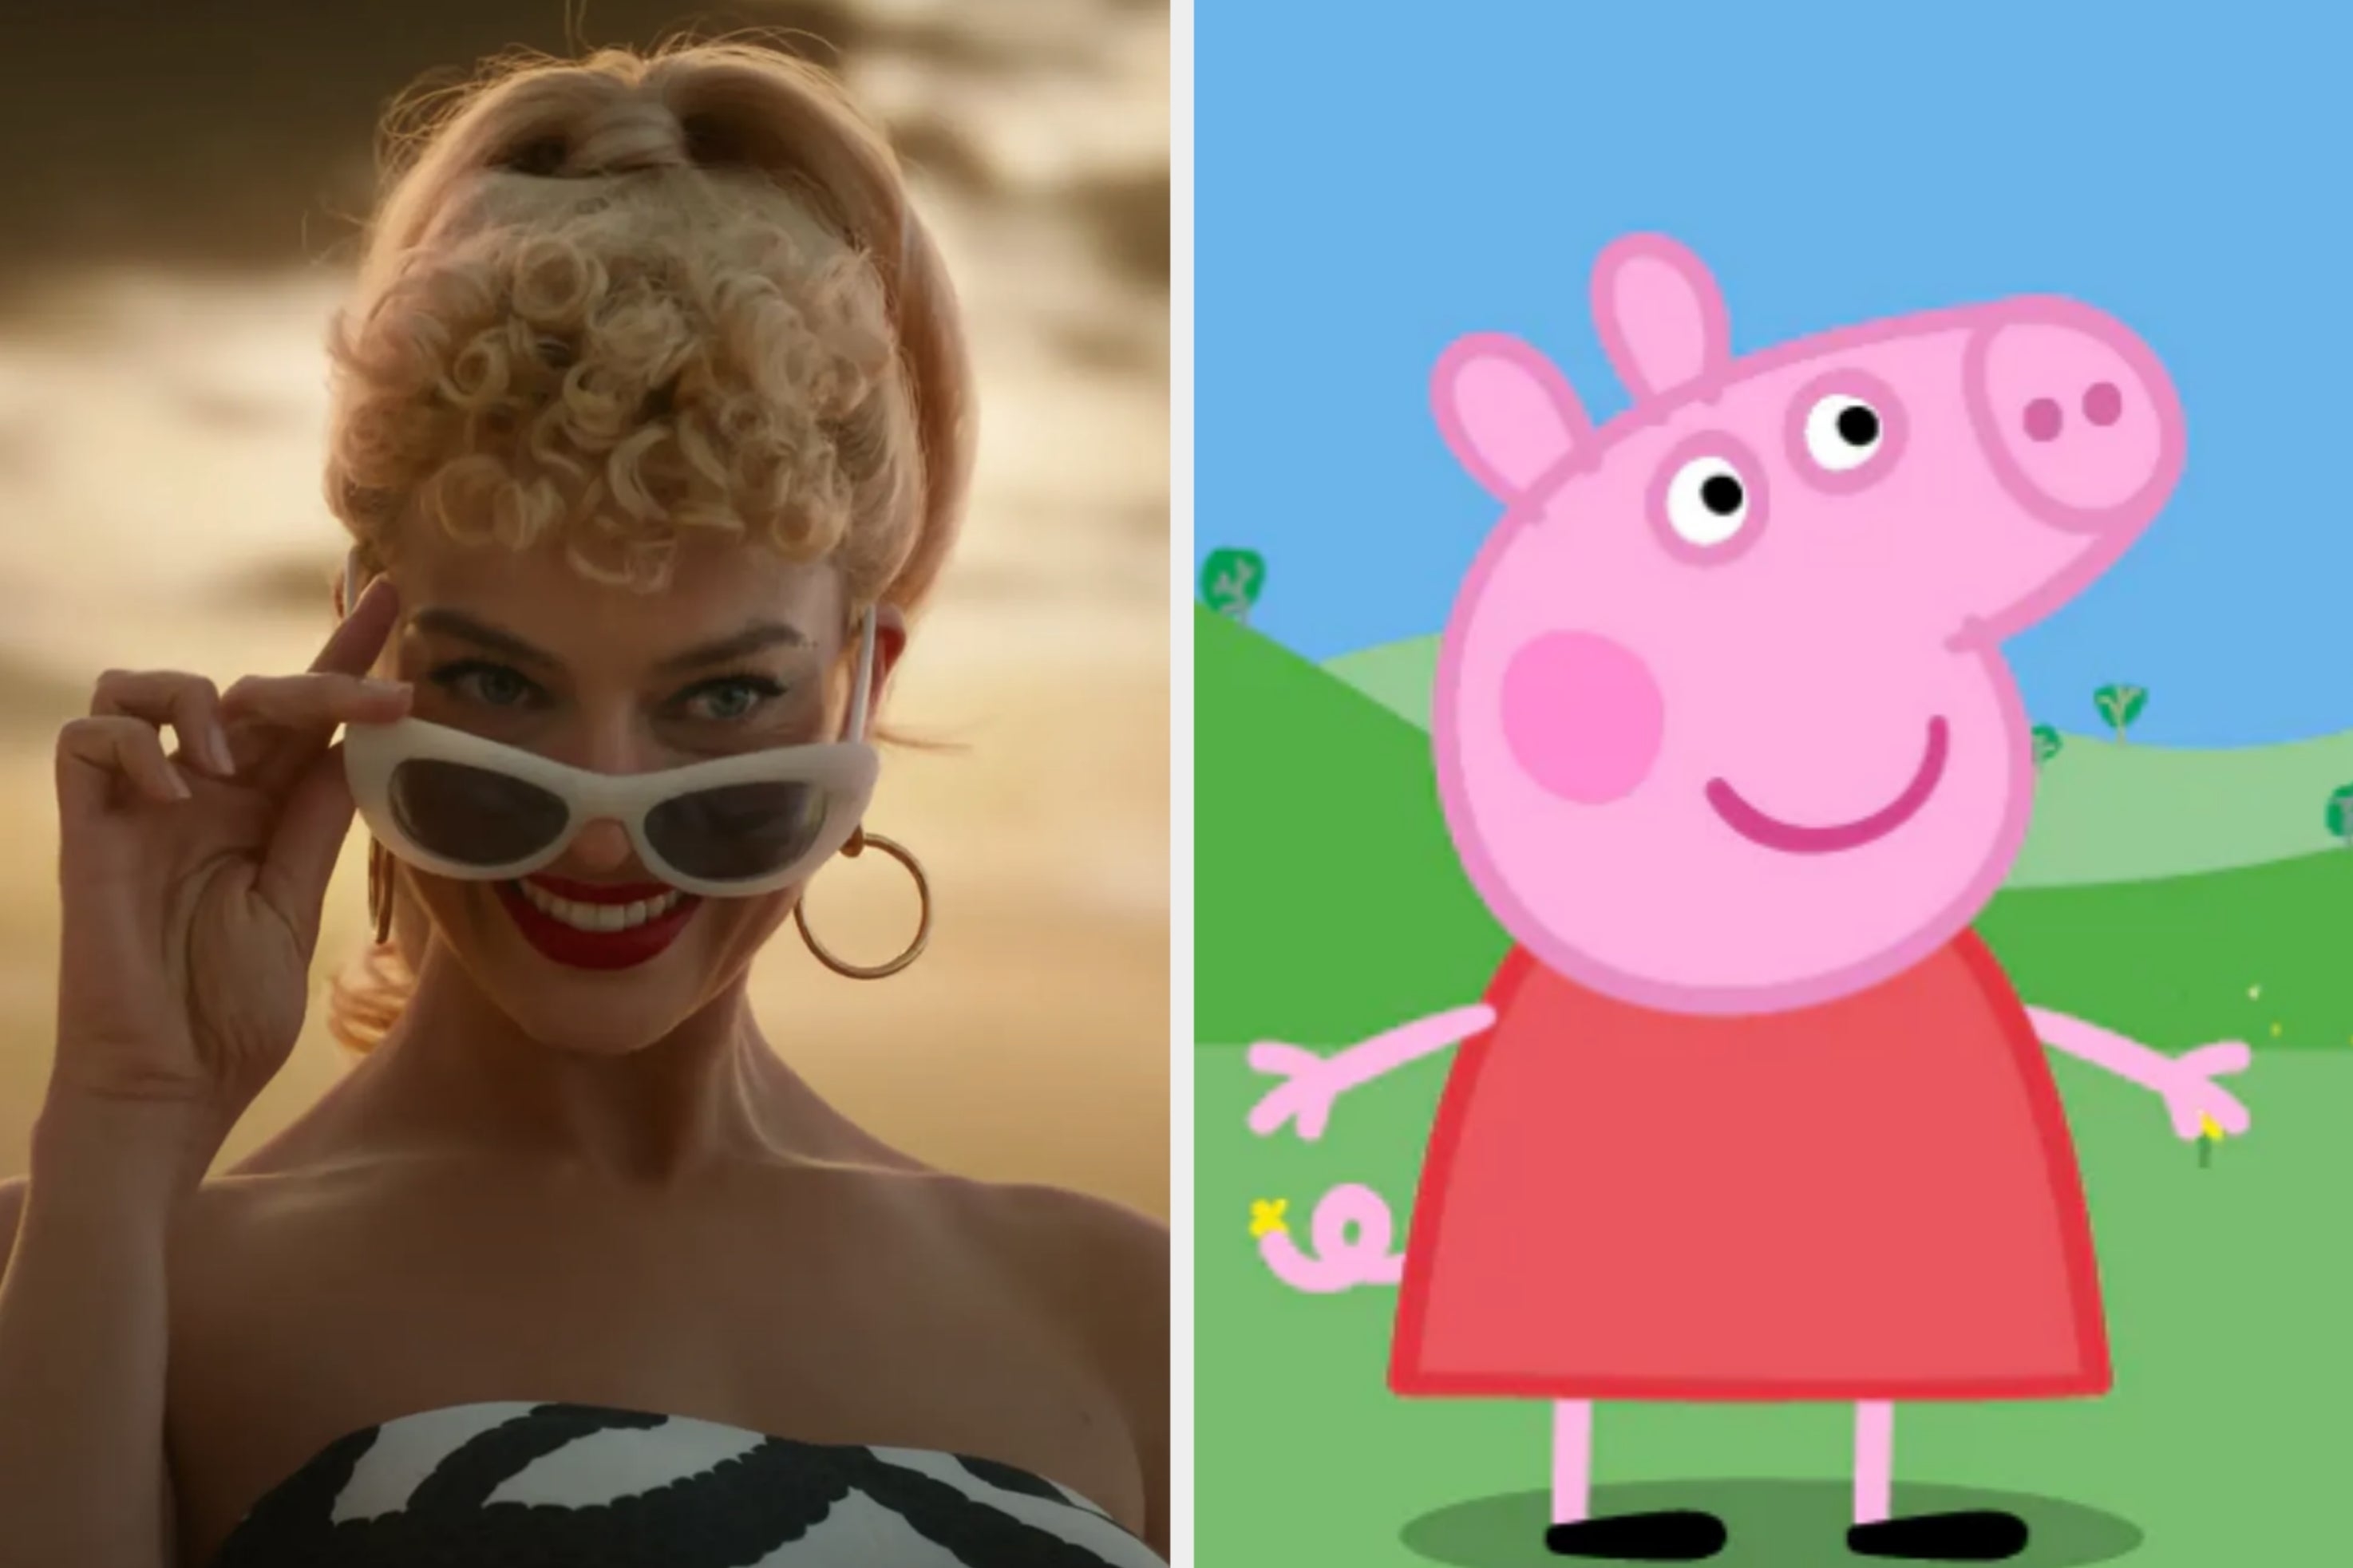 On the left, Margot Robbie smiling and lowering her sunglasses as Barbie, and on the right, Peppa Pig